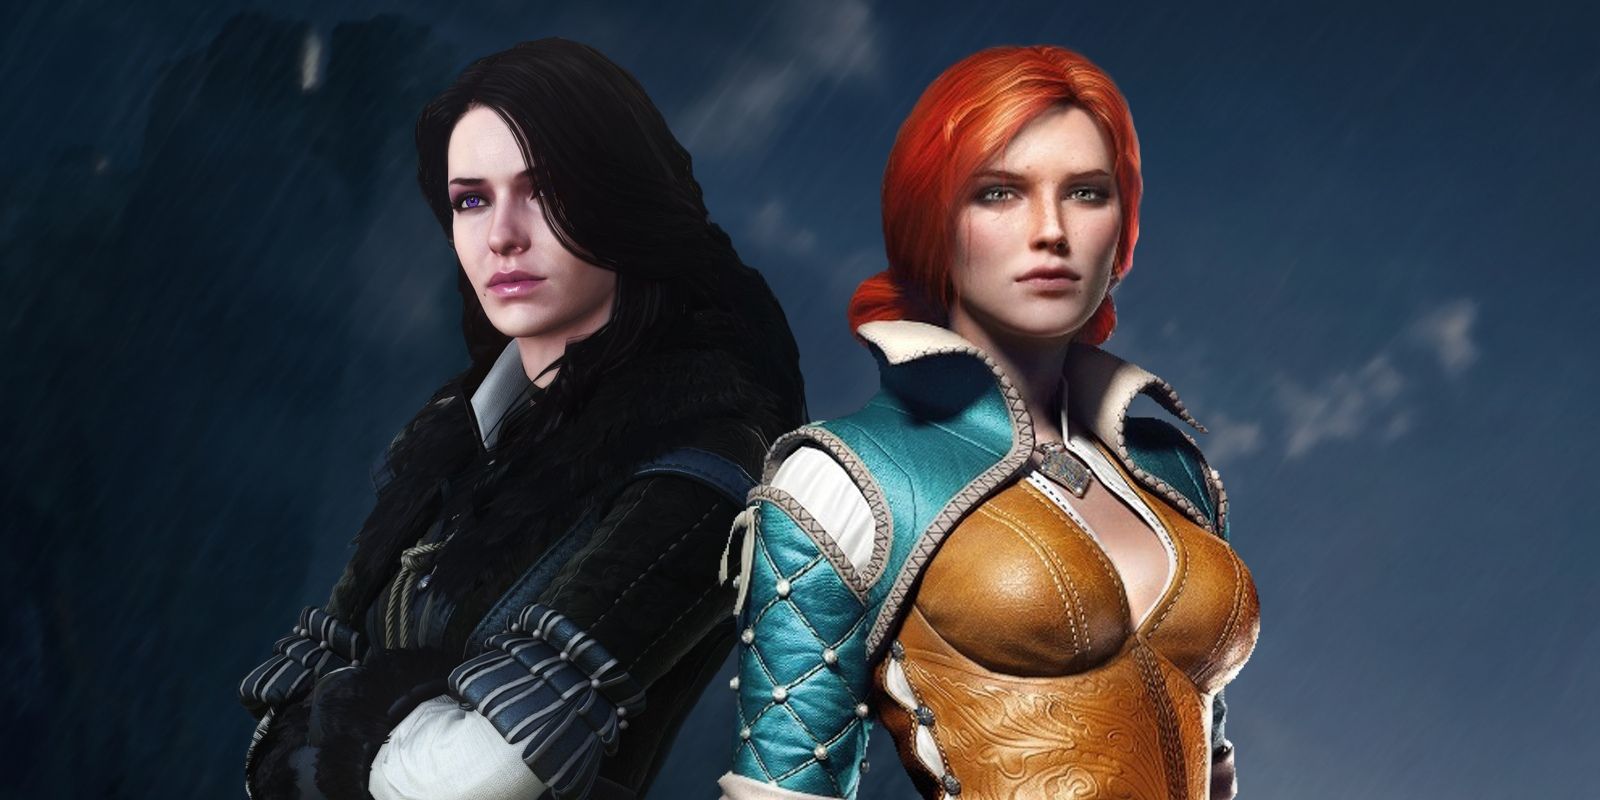 Witcher 3 Romance Mod Allows Cheating With Yennefer & Triss